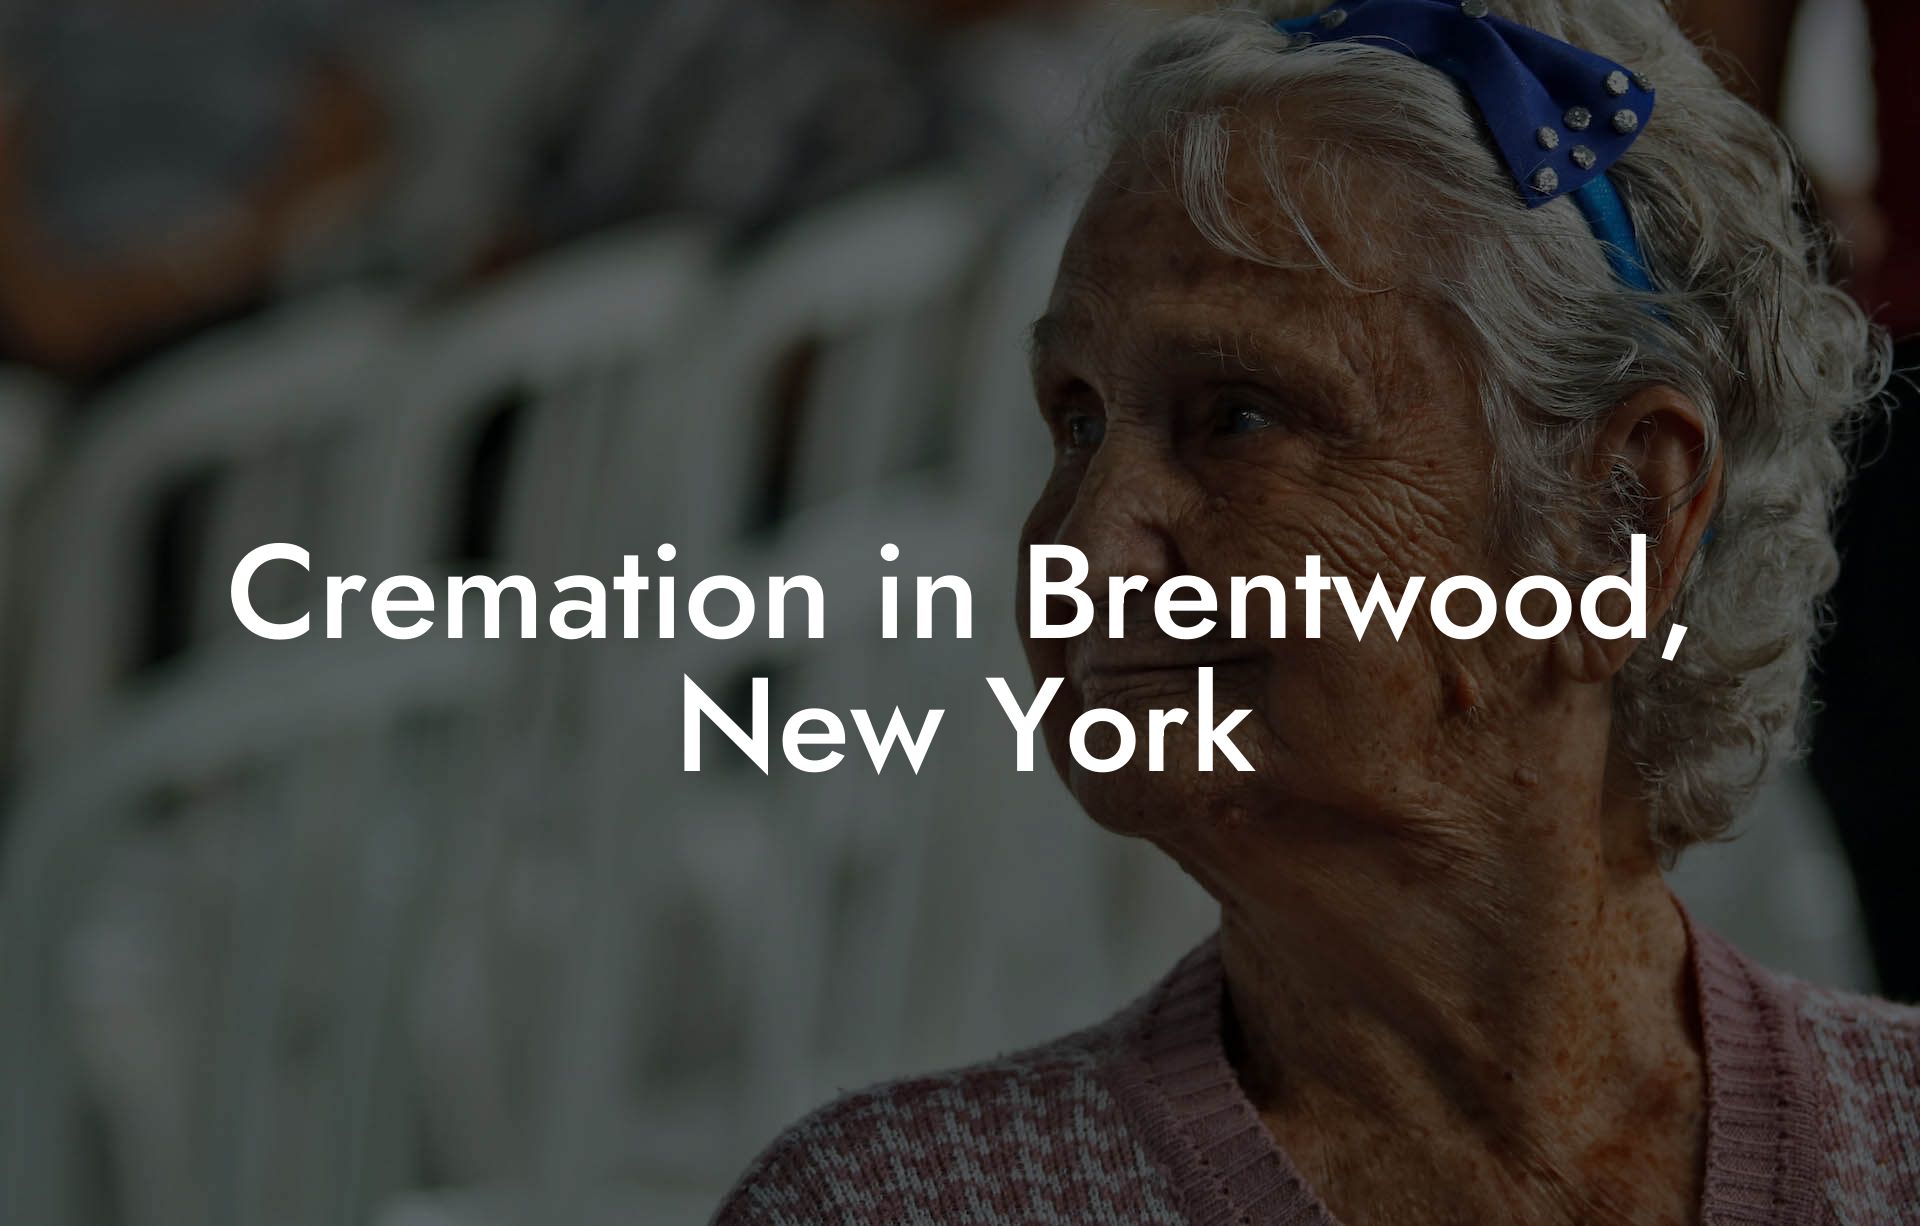 Cremation in Brentwood, New York